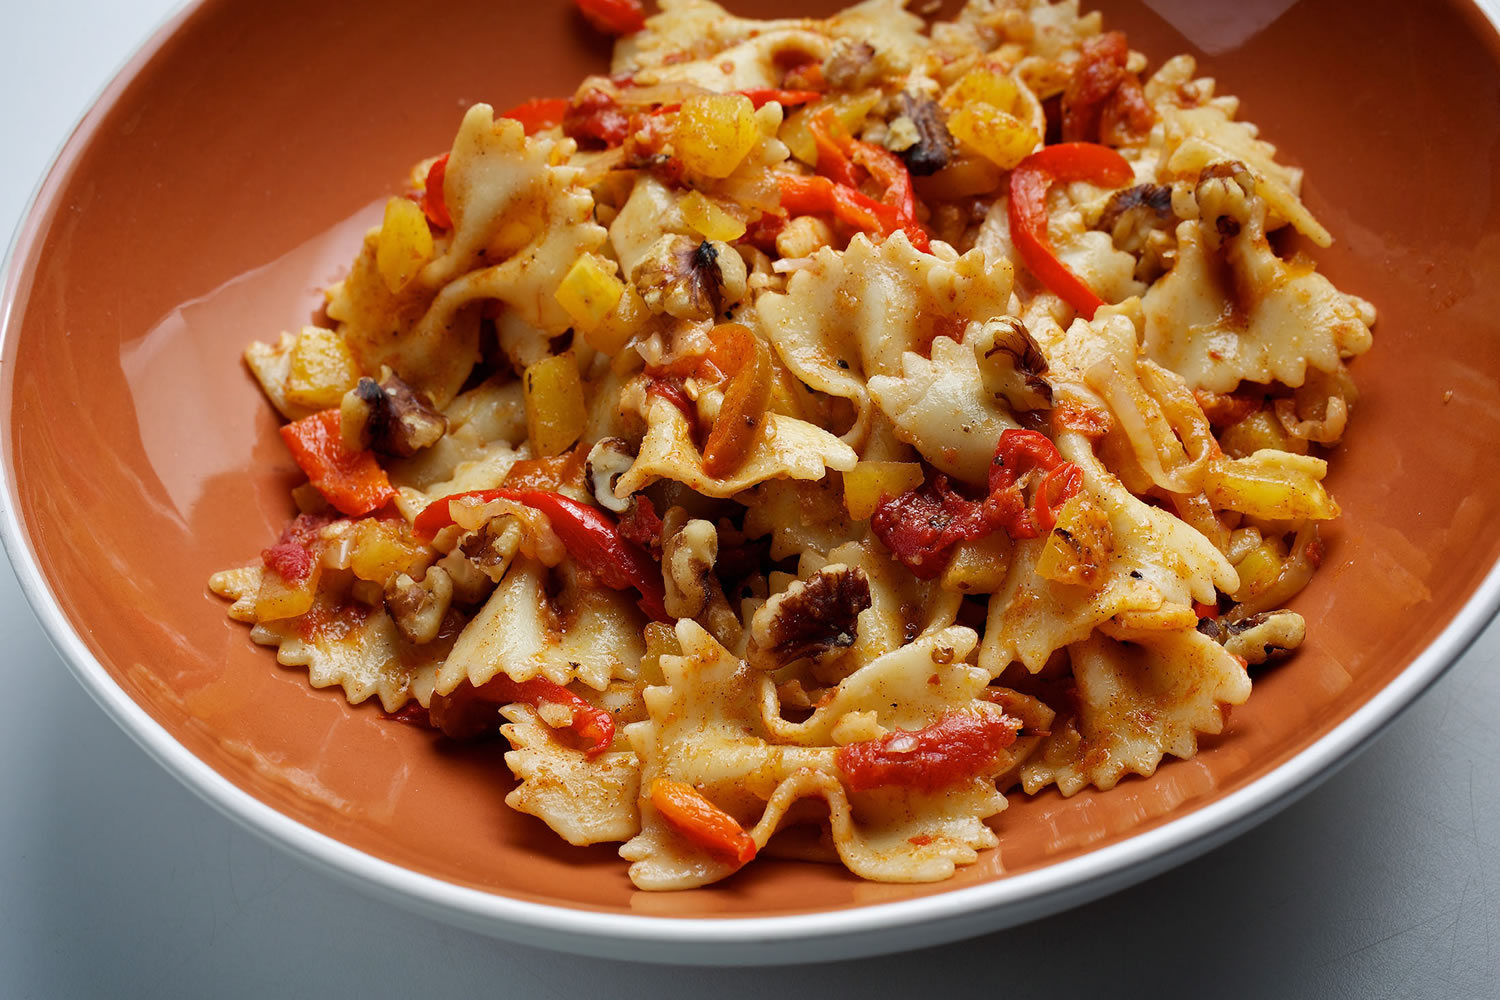 Autumn's bounty, warmed by cinnamon: Farfalle With Squash and Red Peppers.